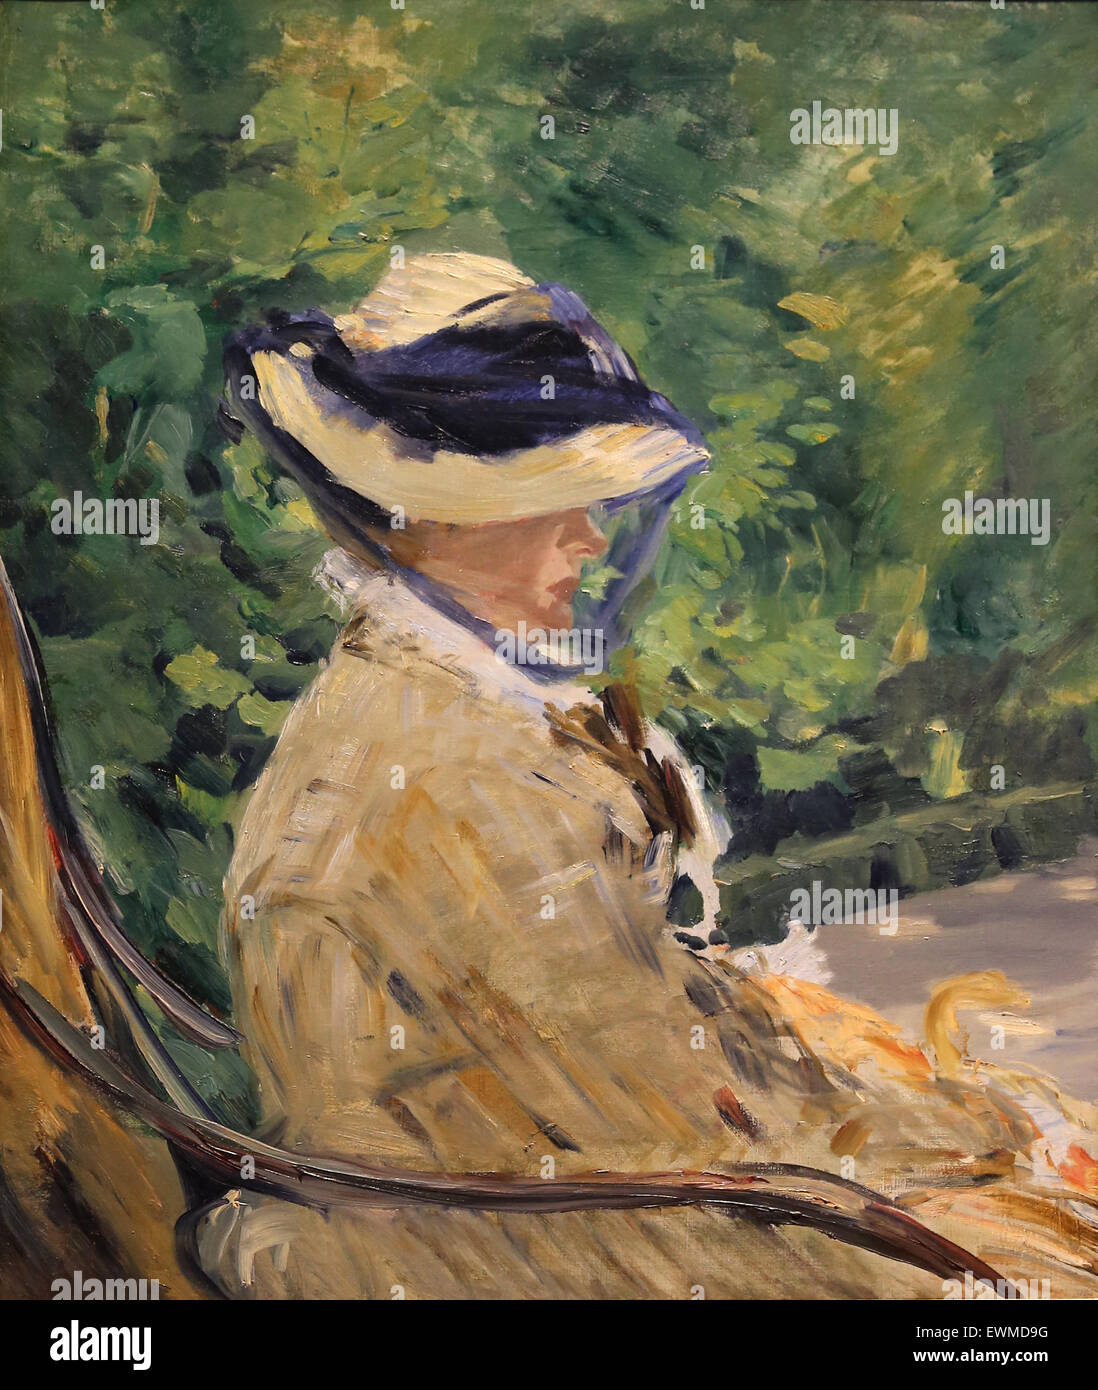 Eduard Manet (1832-1883). French painter. Madame Manet (Suzanne Leenhoff, 1830-1906) at Bellevue, 1880. Oil on canvas. Stock Photo